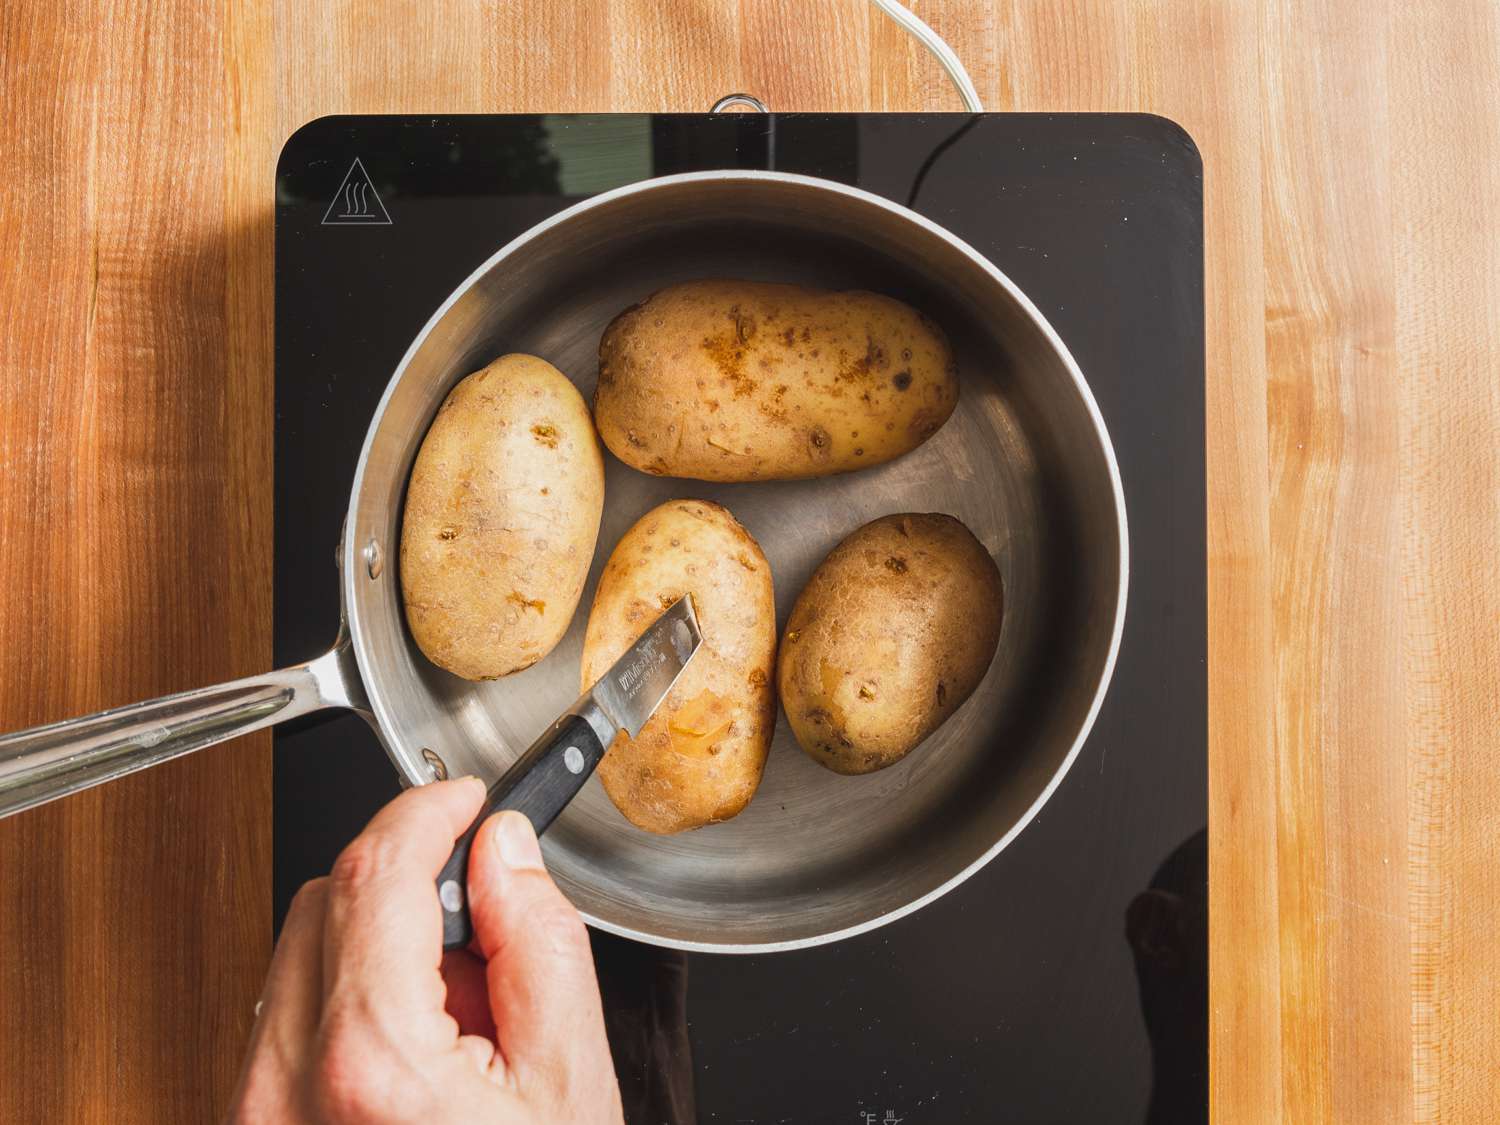 Cooked potatoes in a saucepan being tested for doneness with a sharp paring knife